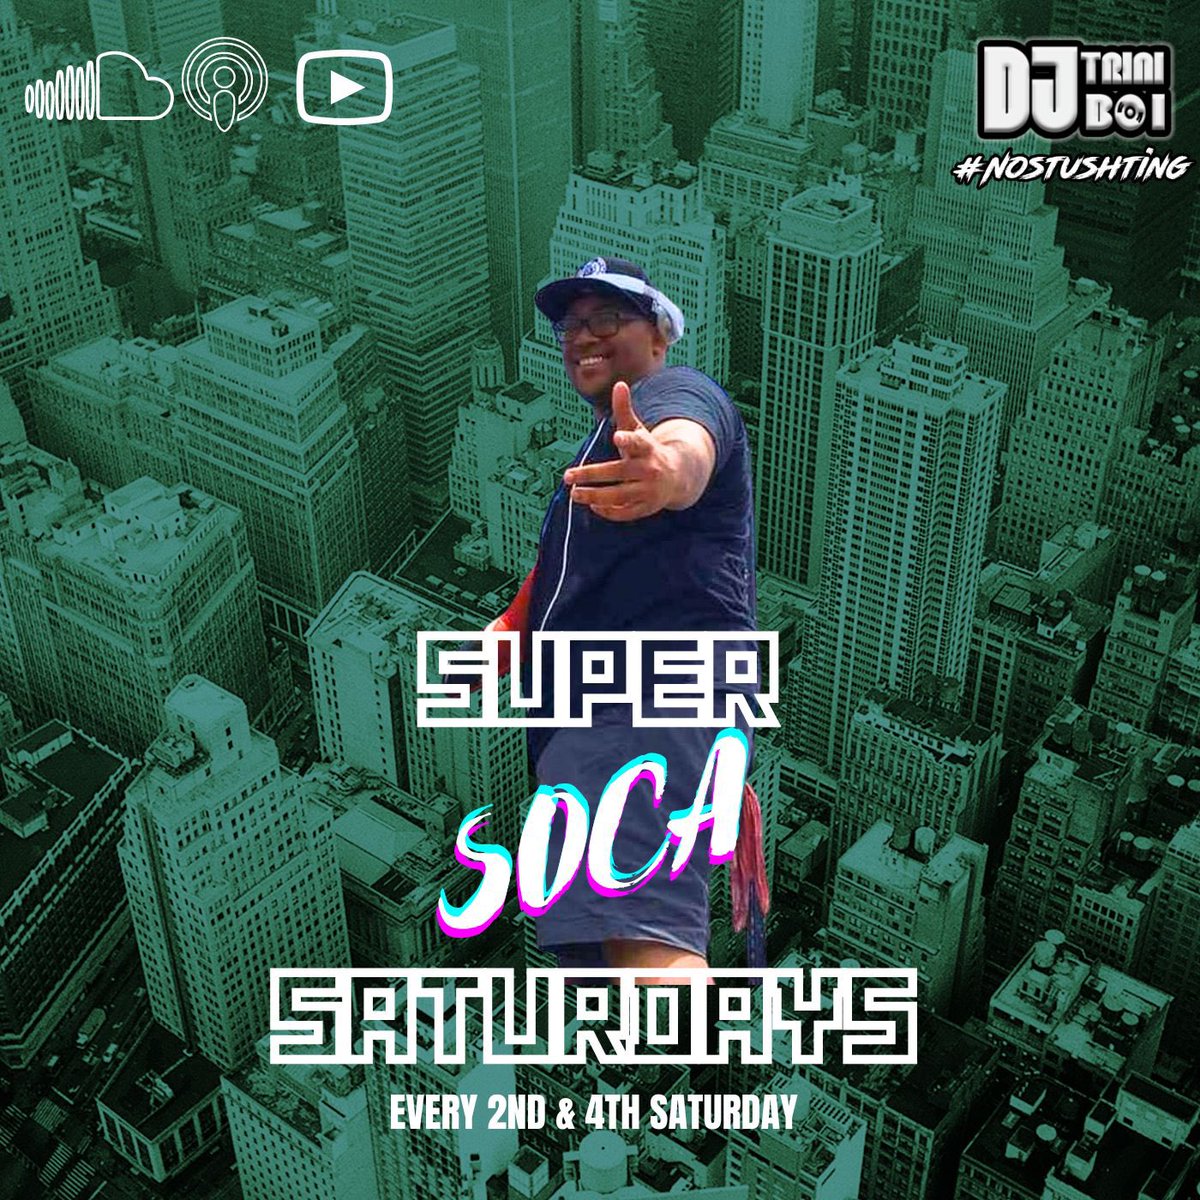 SUPER SOCA SATURDAYS EPISODE 2 IS OFFICIALLY LIVE ON SOUNDCLOUD, YOUTUBE AND APPLE PODCASTS ‼️🔊
.

#SuperSocaSaturdays #BashmentSoca #Soca2024 #DennerySegment #Soca 

SoundCloud: on.soundcloud.com/rdq5nrsNdBFxnA…

YouTube: youtu.be/8ymrtEpg-K4?si…

Apple Podcasts: podcasts.apple.com/us/podcast/dj-…